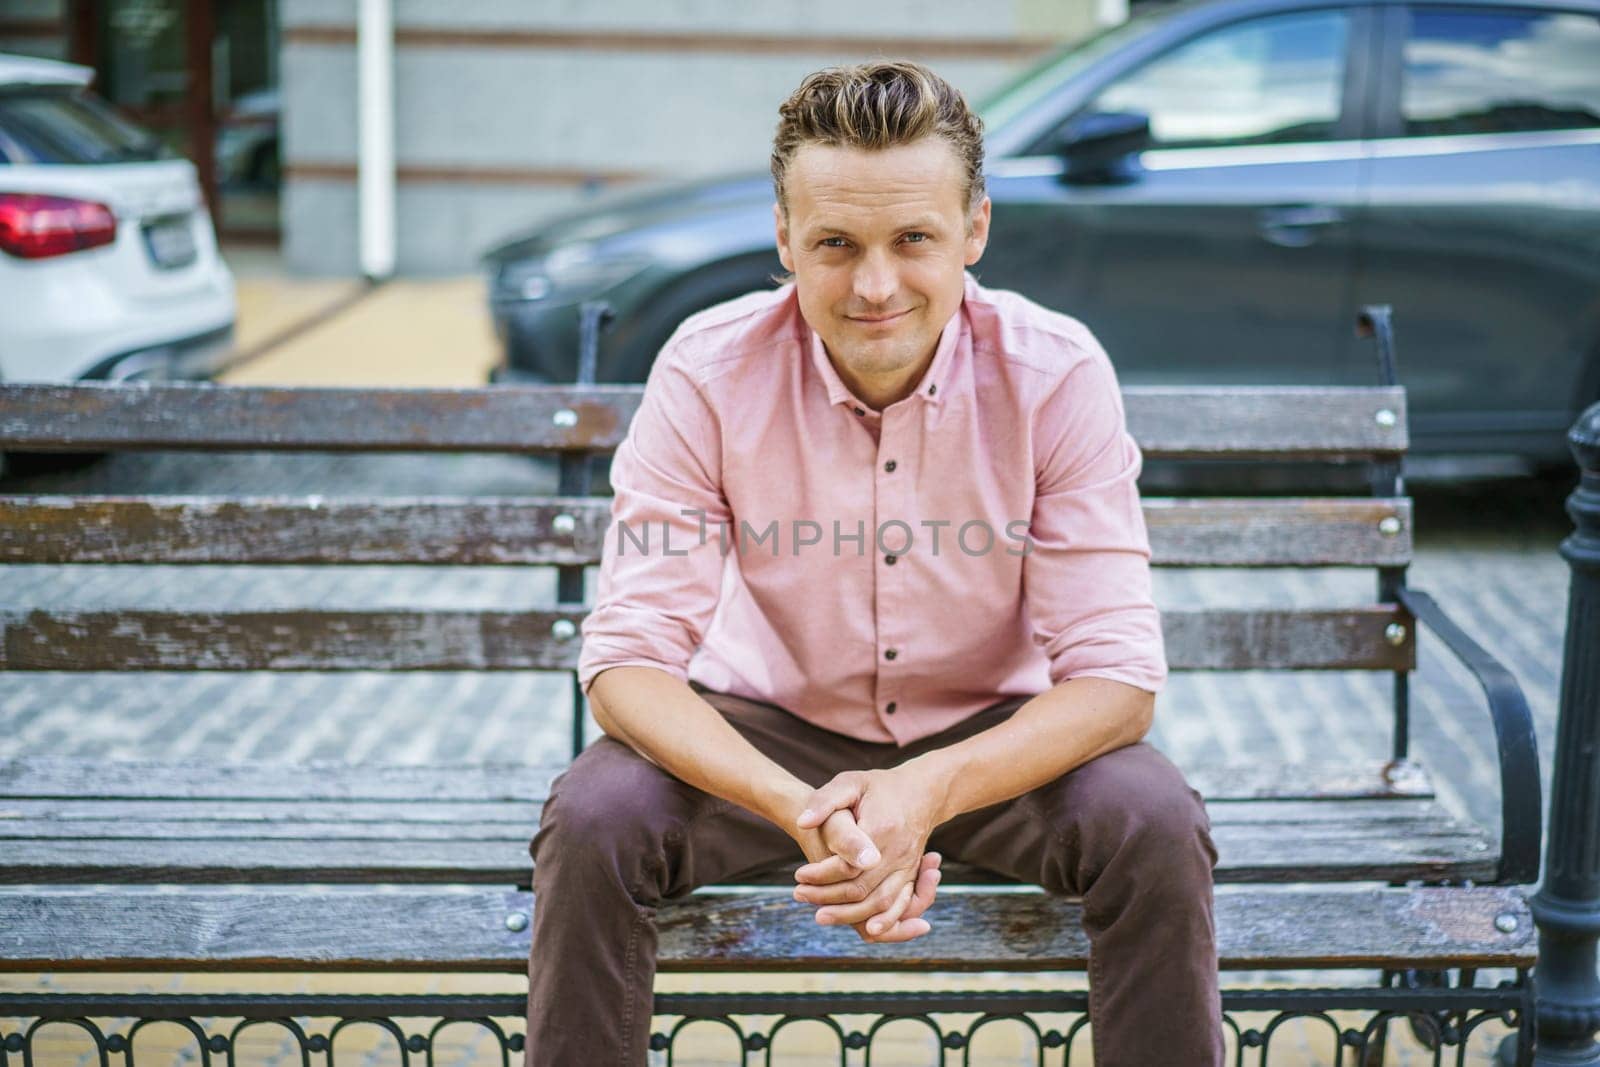 Charismatic and respectable man in portrait, sitting on city bench on street. Man exudes confidence and professionalism, showcasing sophisticated and charming demeanor. . High quality photo